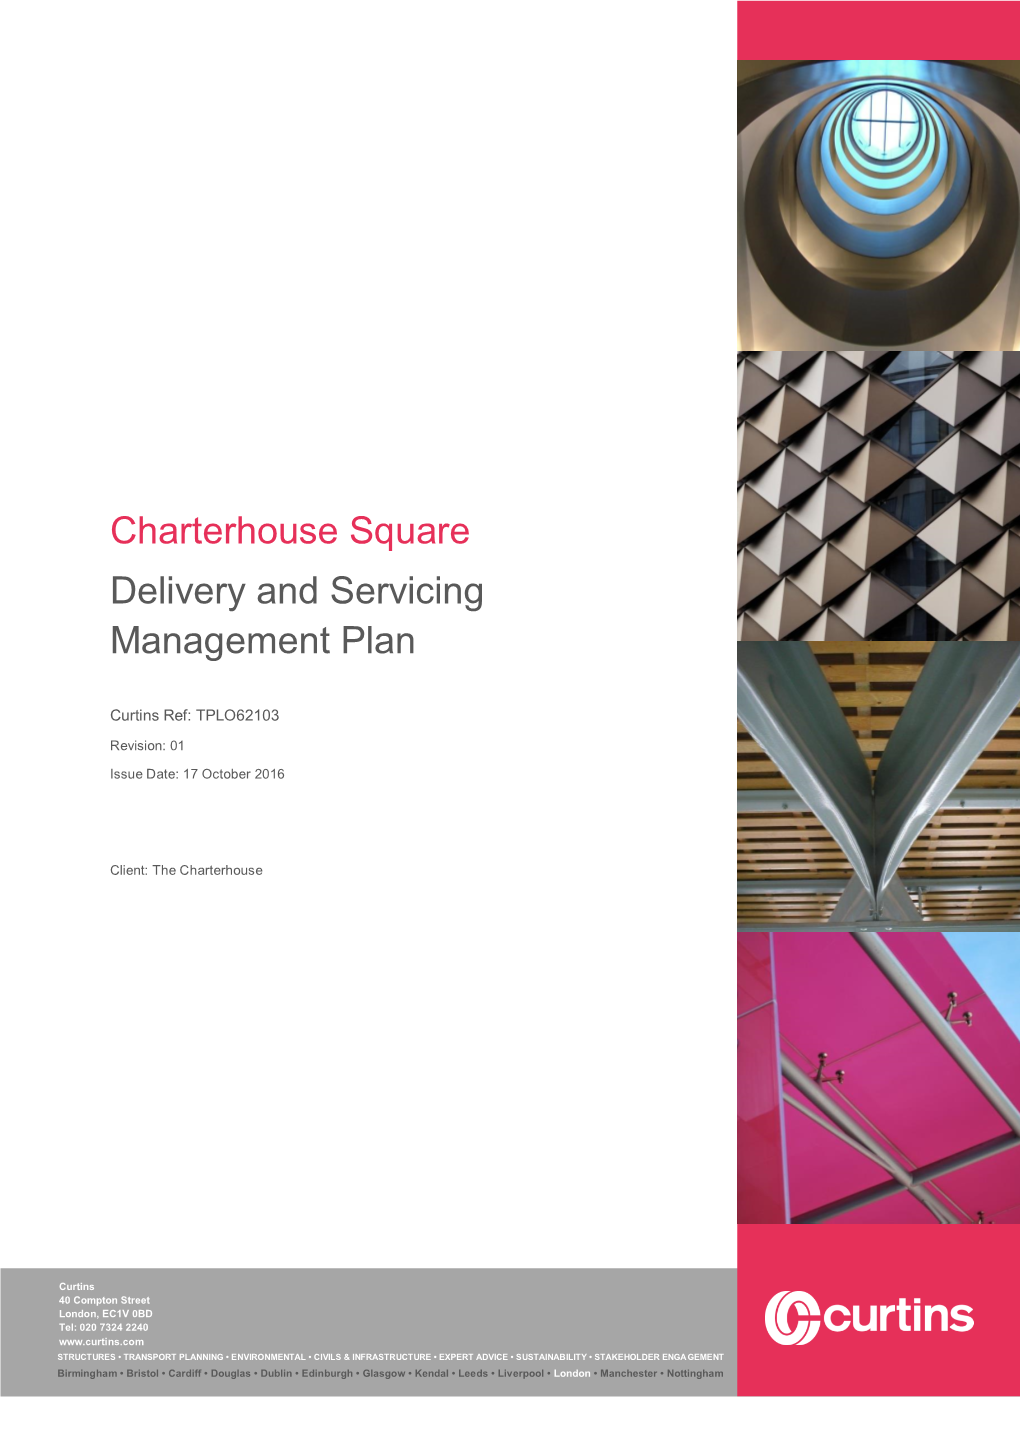 Charterhouse Square Delivery and Servicing